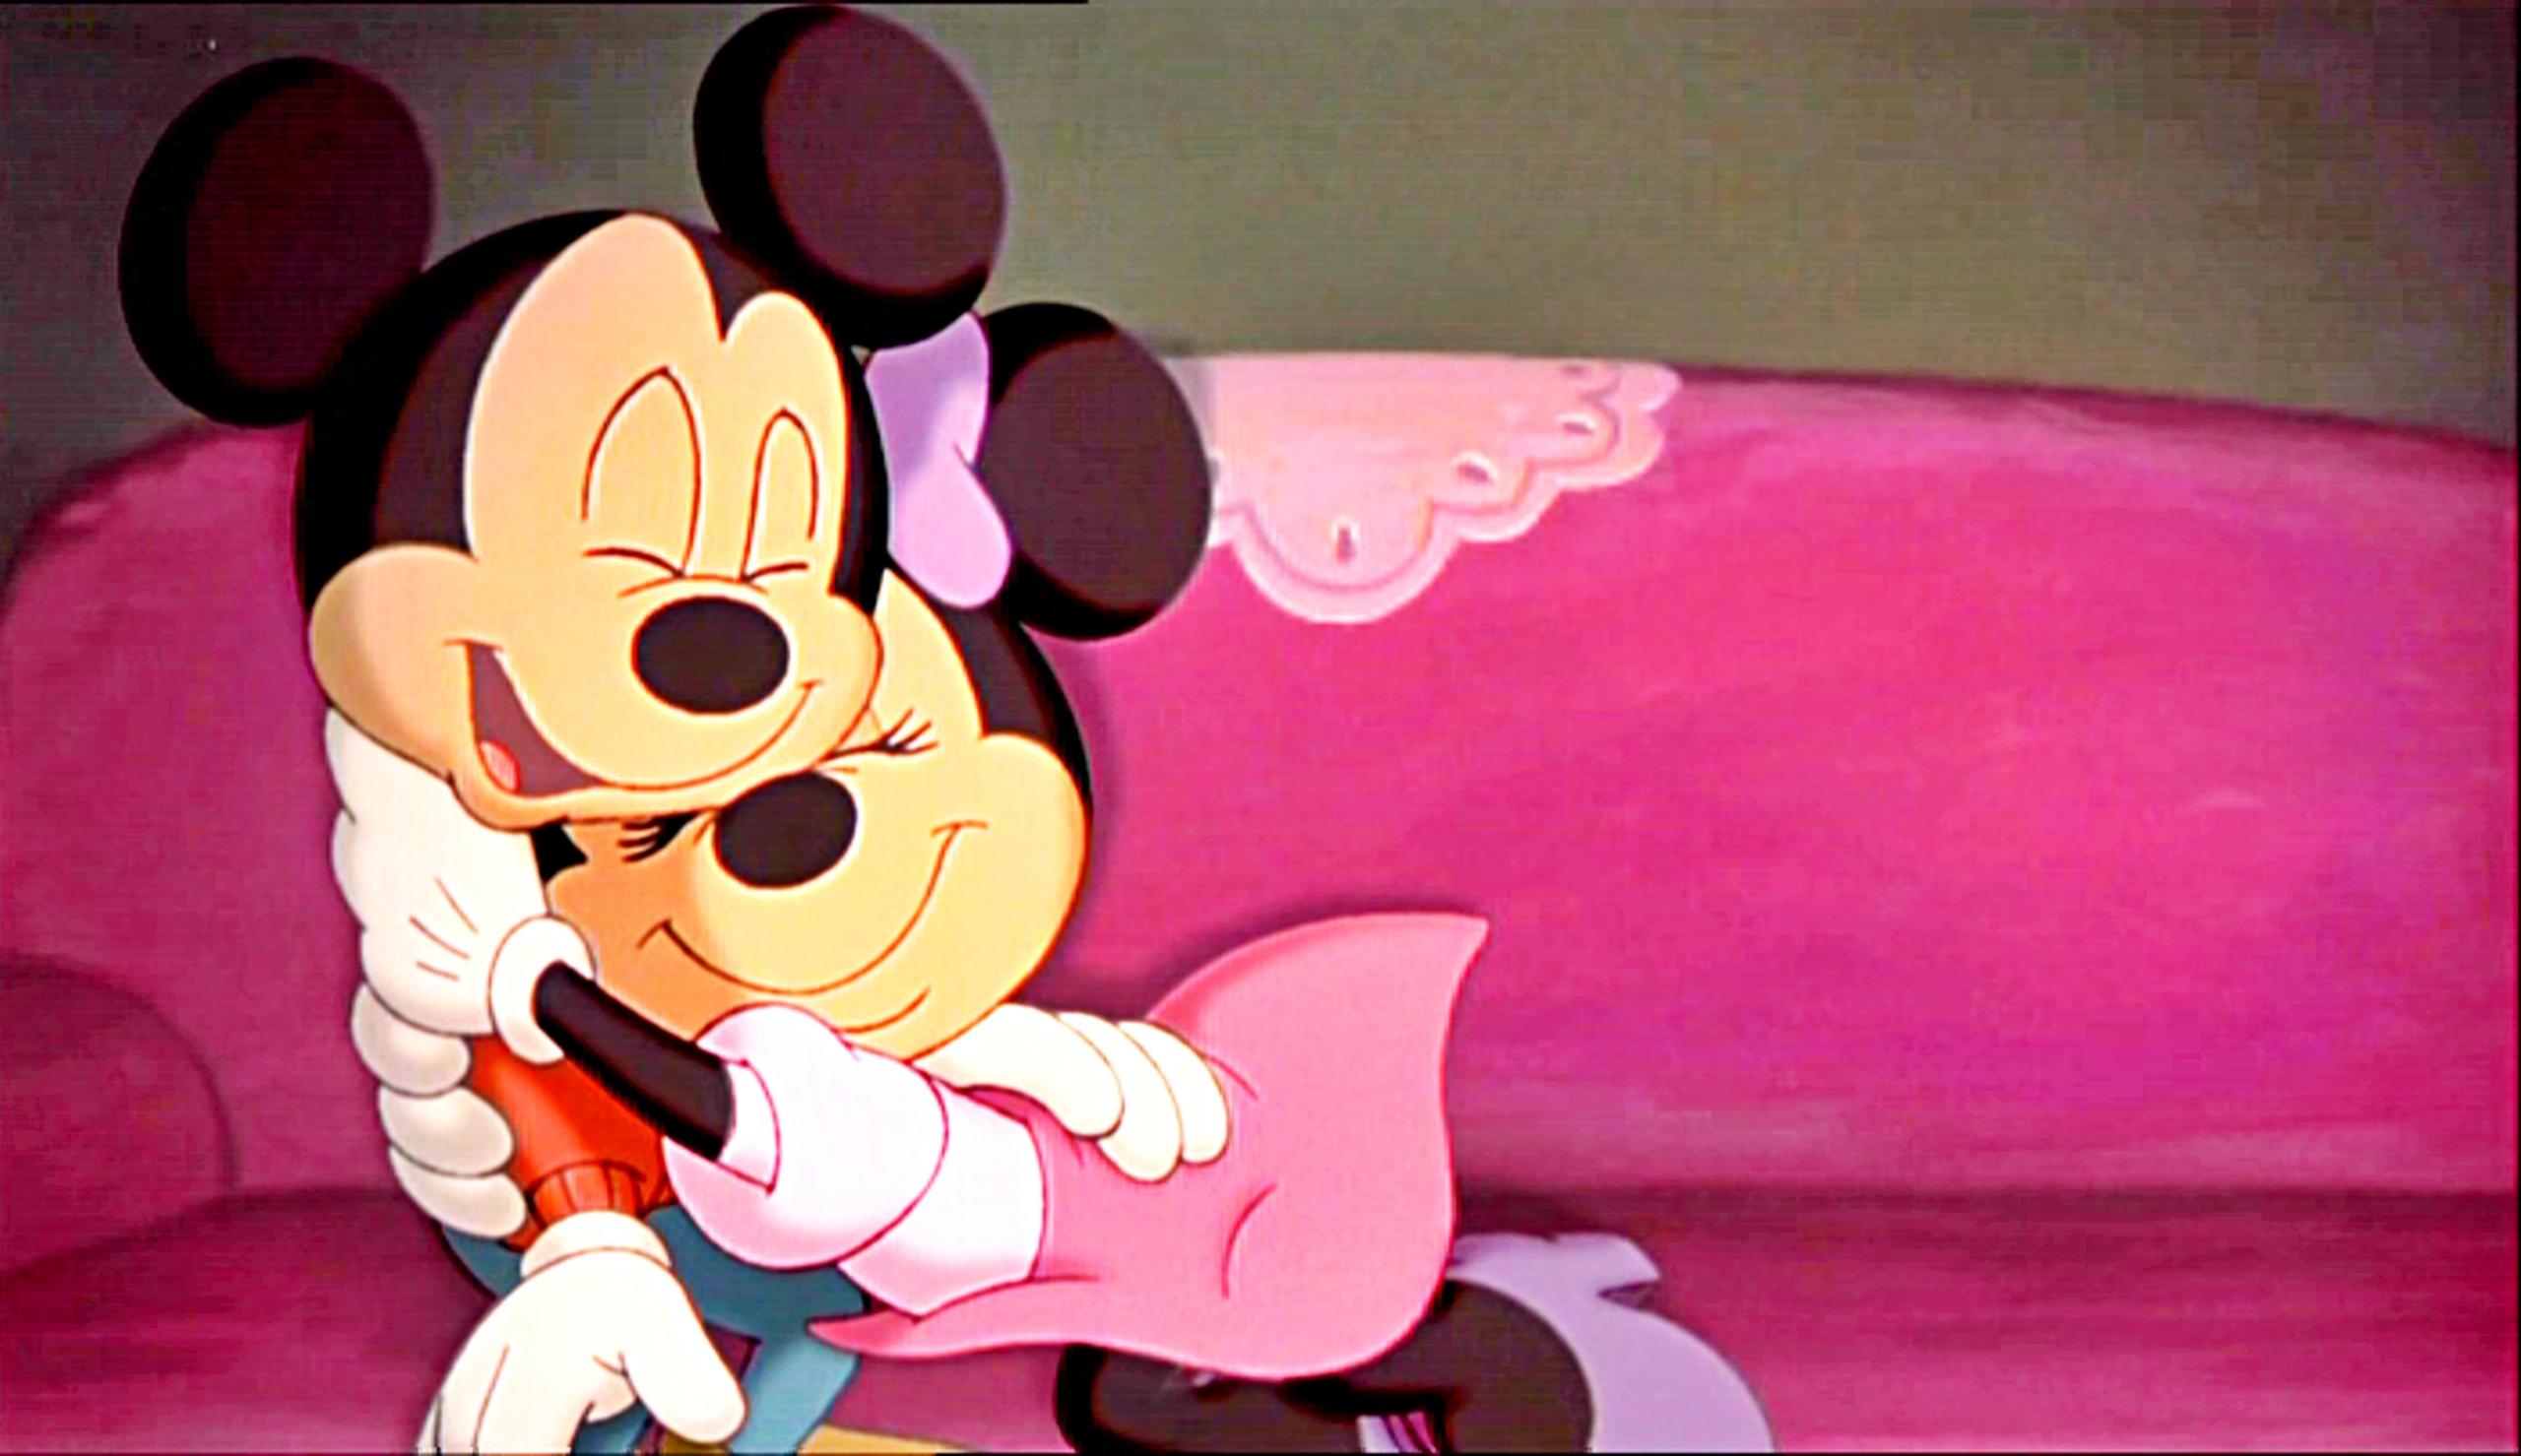 wallpapers everyday so you can enjoy them all DToday a Minnie